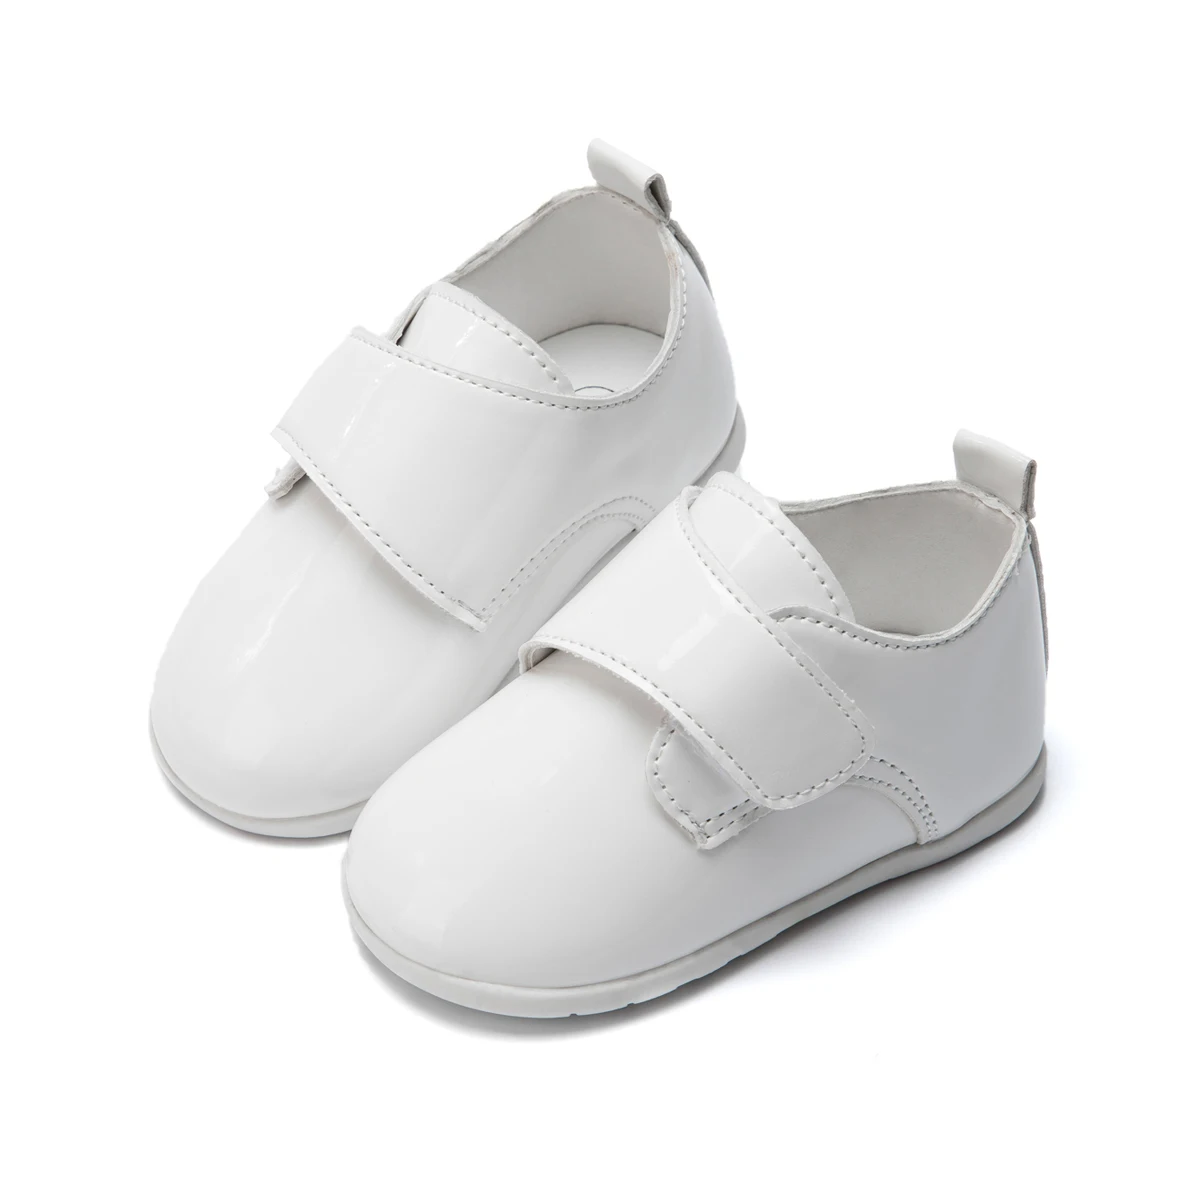 New Arrivals Outdoor Toddler Wedding Loafers PU leather Rubber Sole Non-Slip Baby Dress Shoes